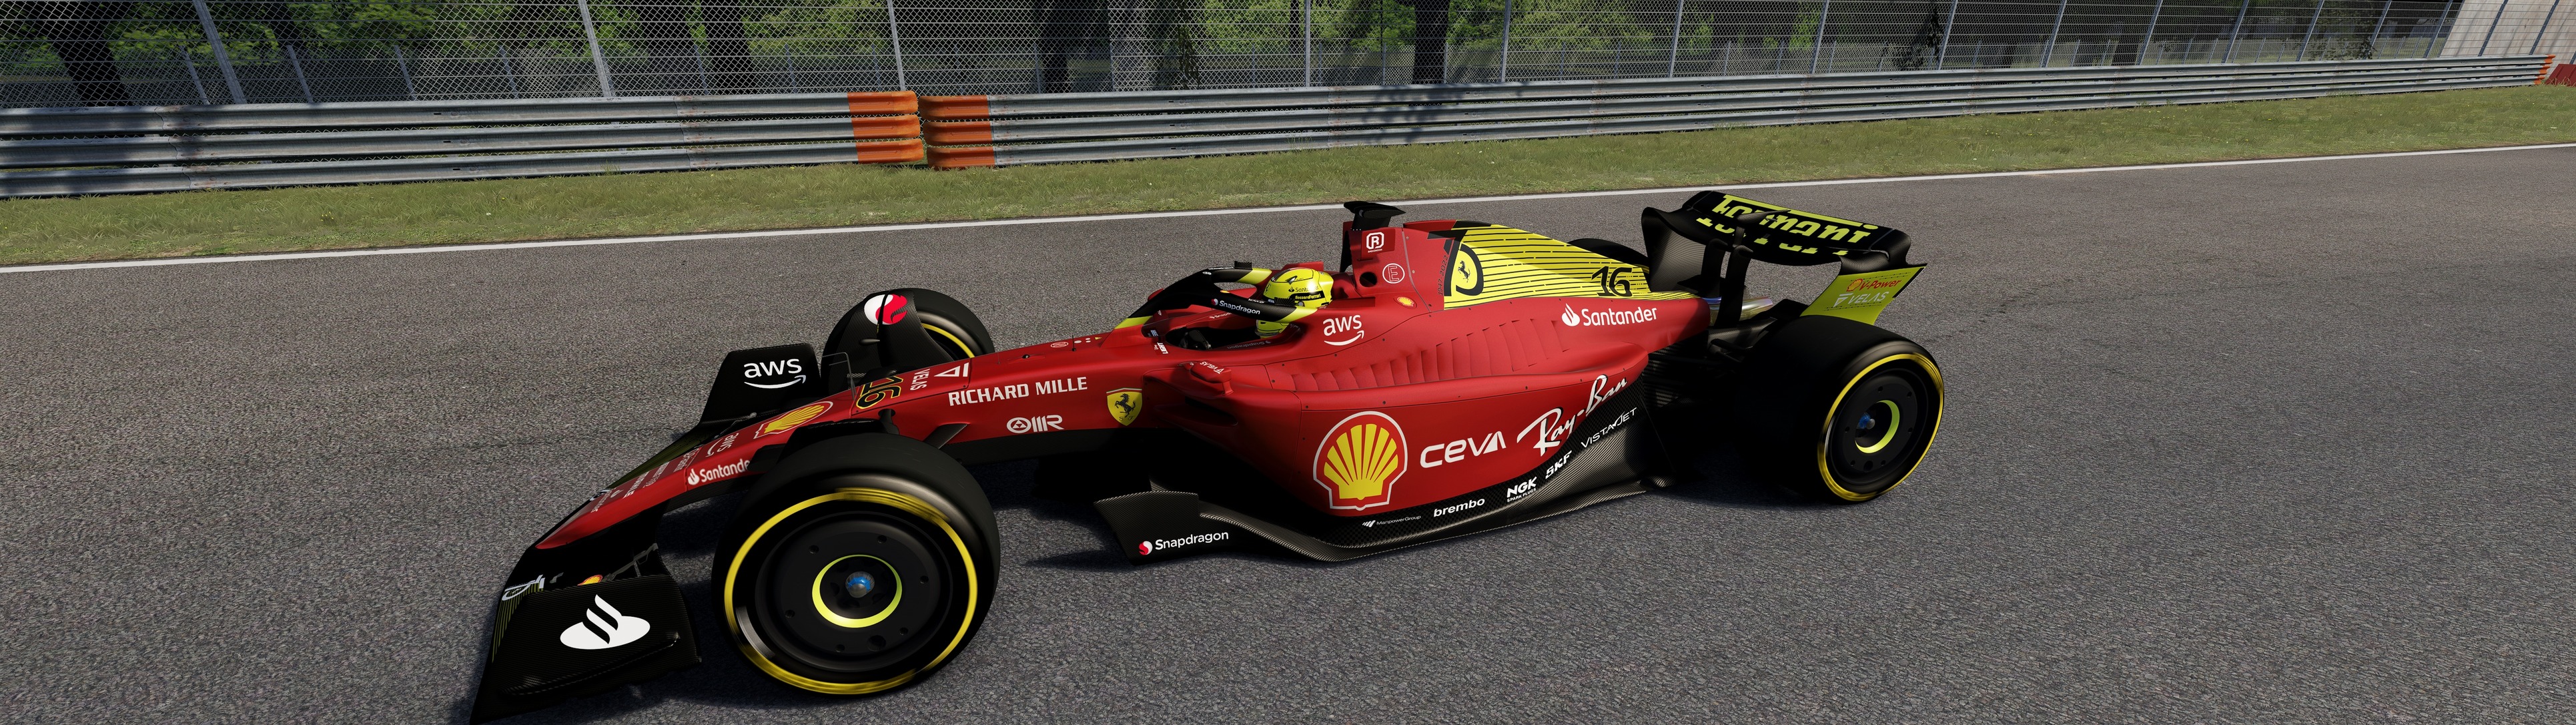 More information about "Assetto Corsa: MSF Hybrid F-75 v1.1 "Giallo Modena" by MSF Italian Modding Team!"